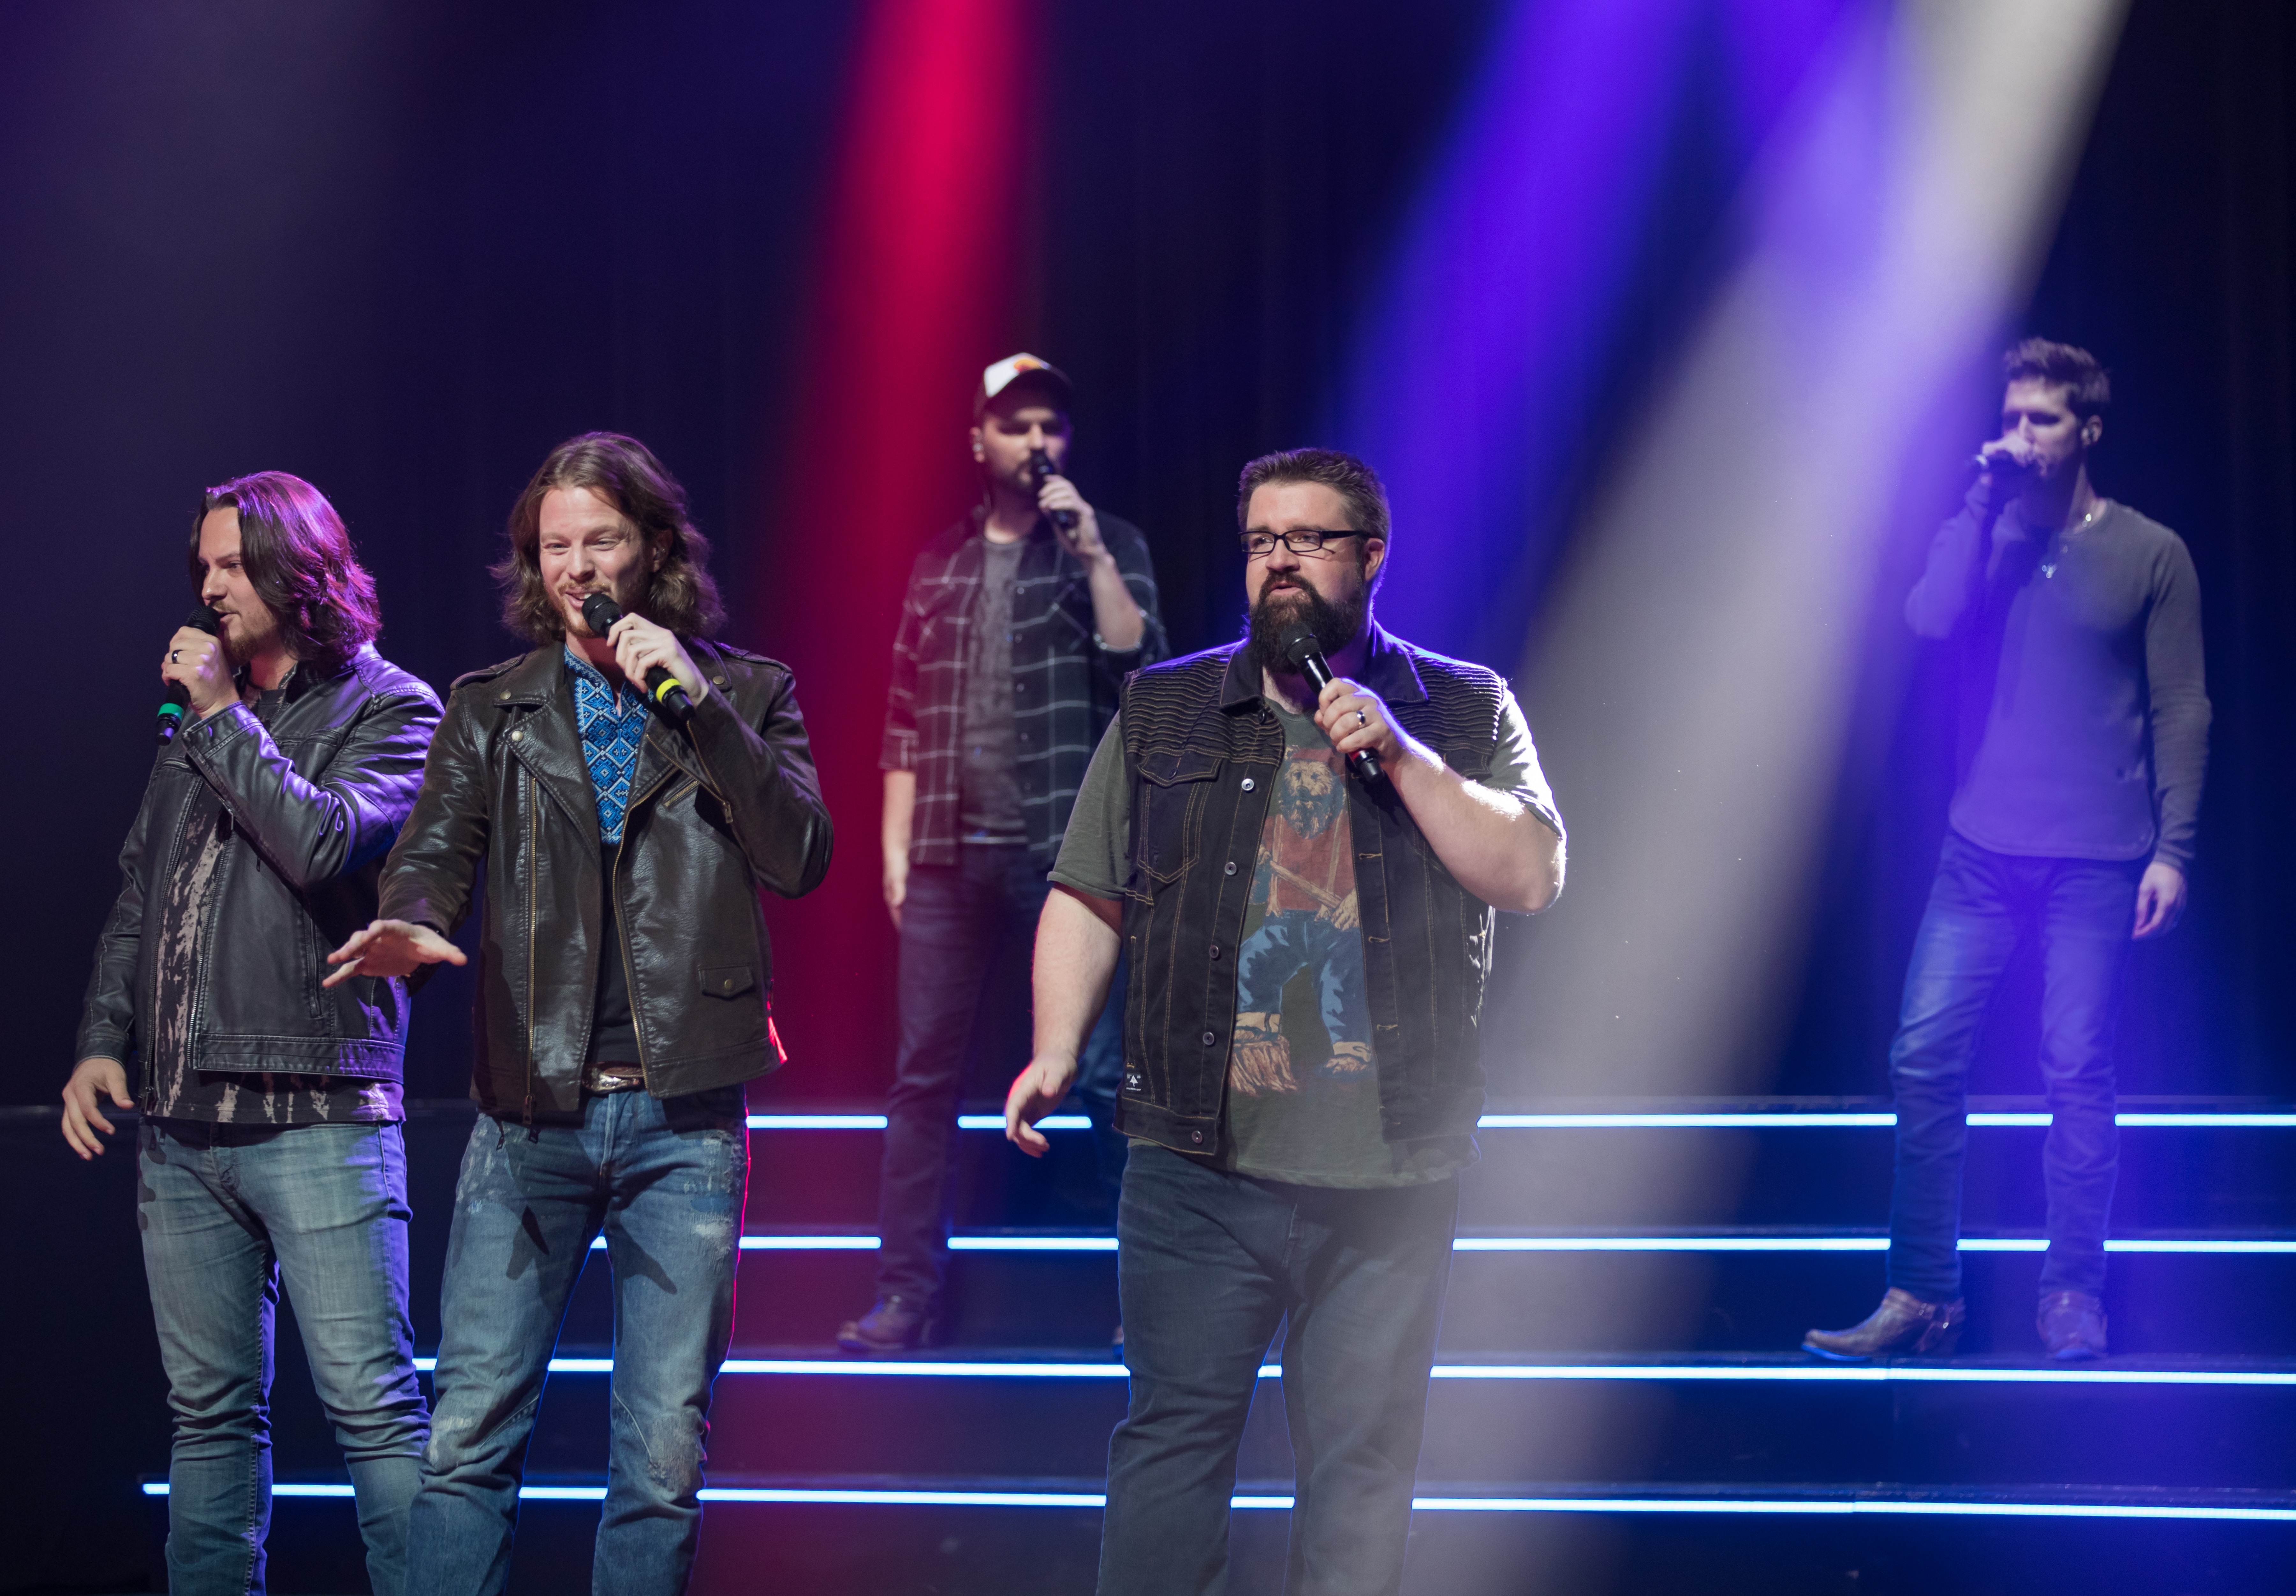 Home Free; Photo Credit: Amiee Stubbs Photography for Country Music Hall of Fame and Museum